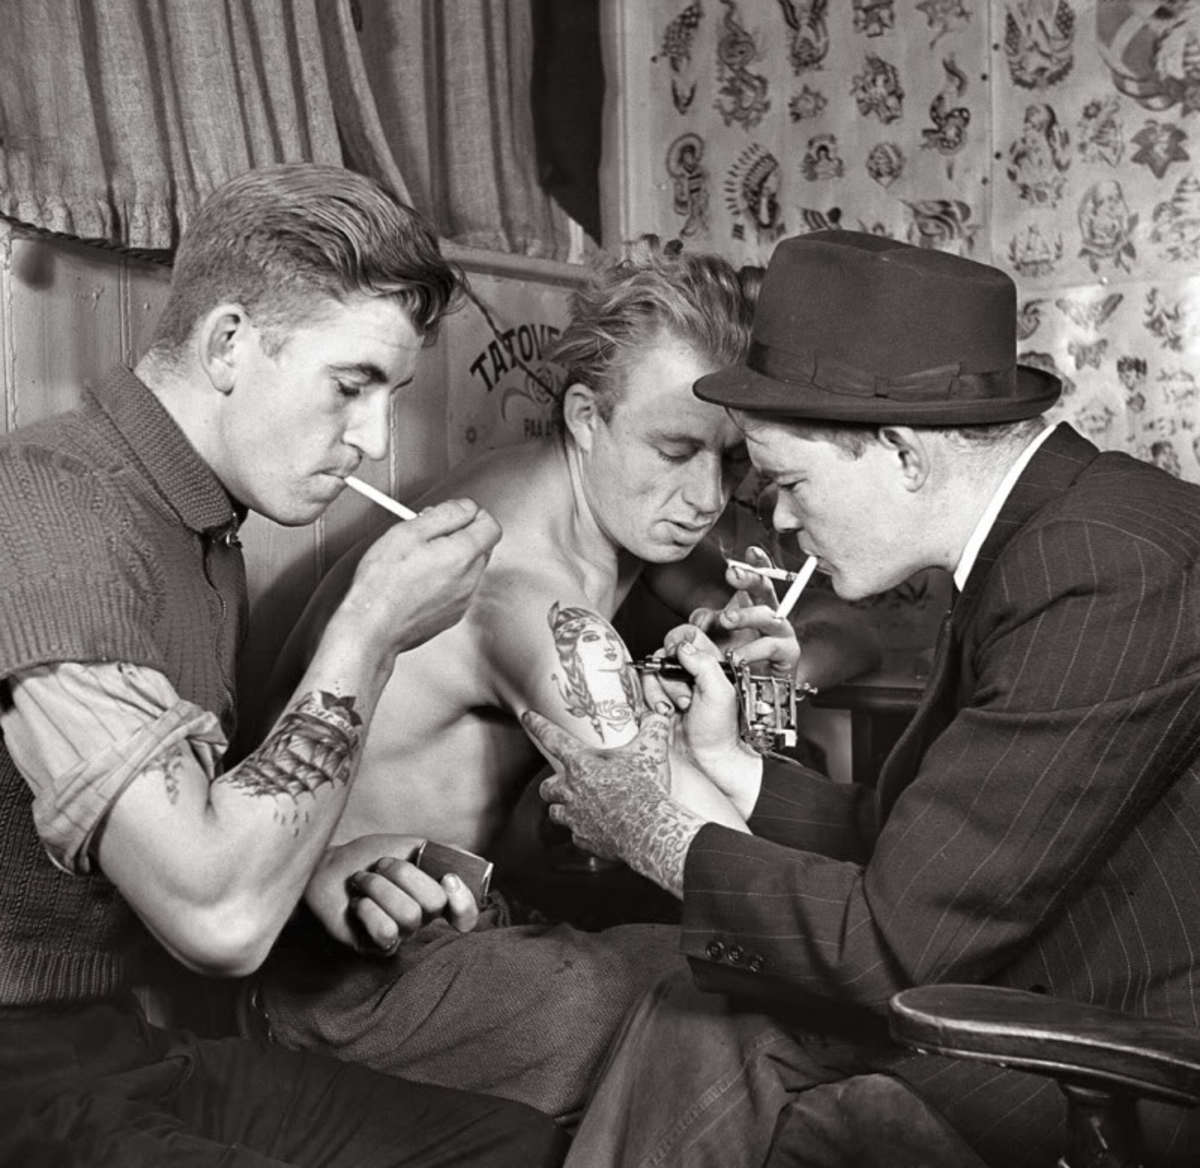 The history of sailor tattoos.